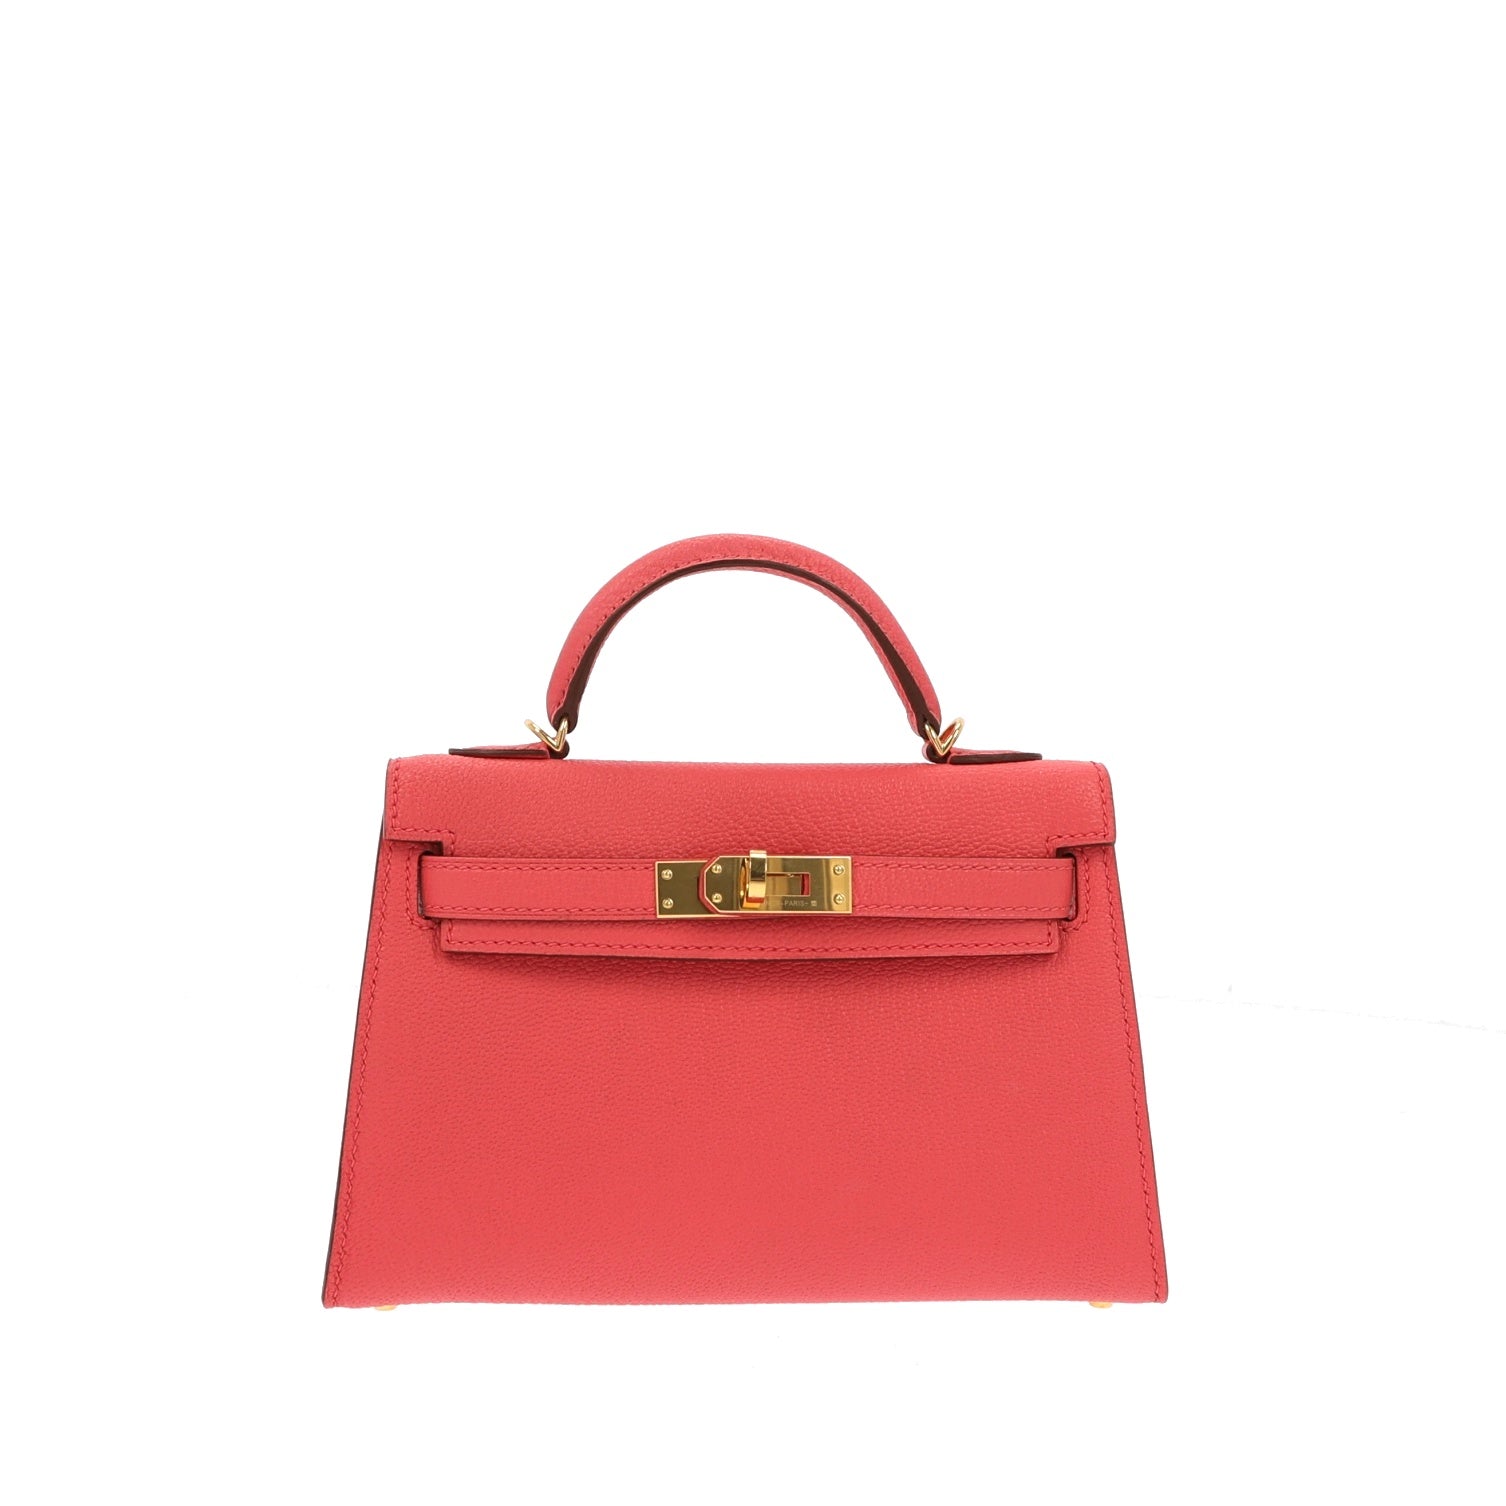 Hermes Kelly 25 Rose Lipstick PInk Chevre Limited Edition Sellier